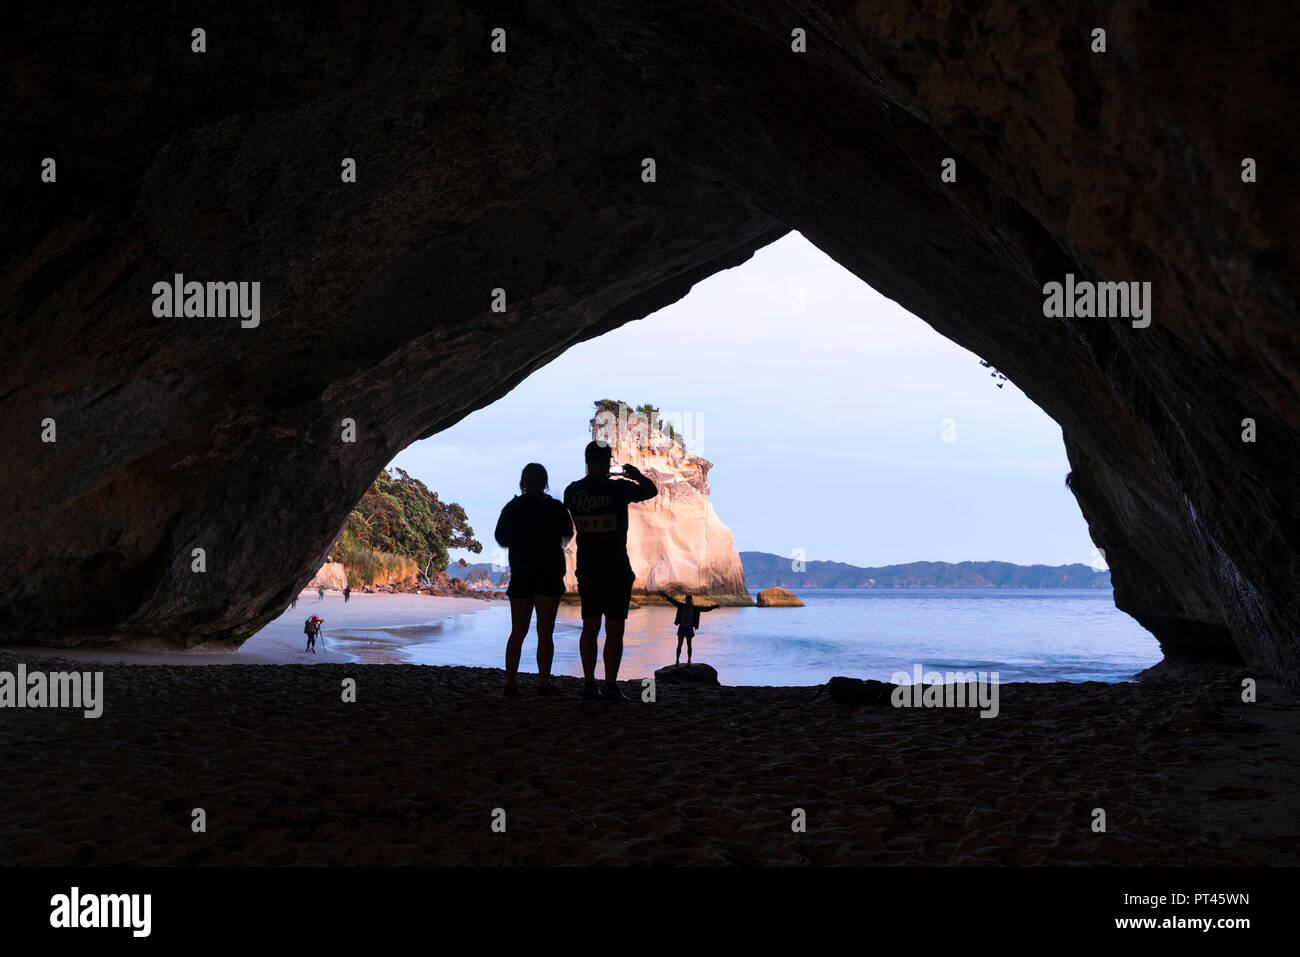 Three people's silhouette taking photographs at Cathedral Cove, Hahei, Waikato region, North Island, New Zealand, Stock Photo